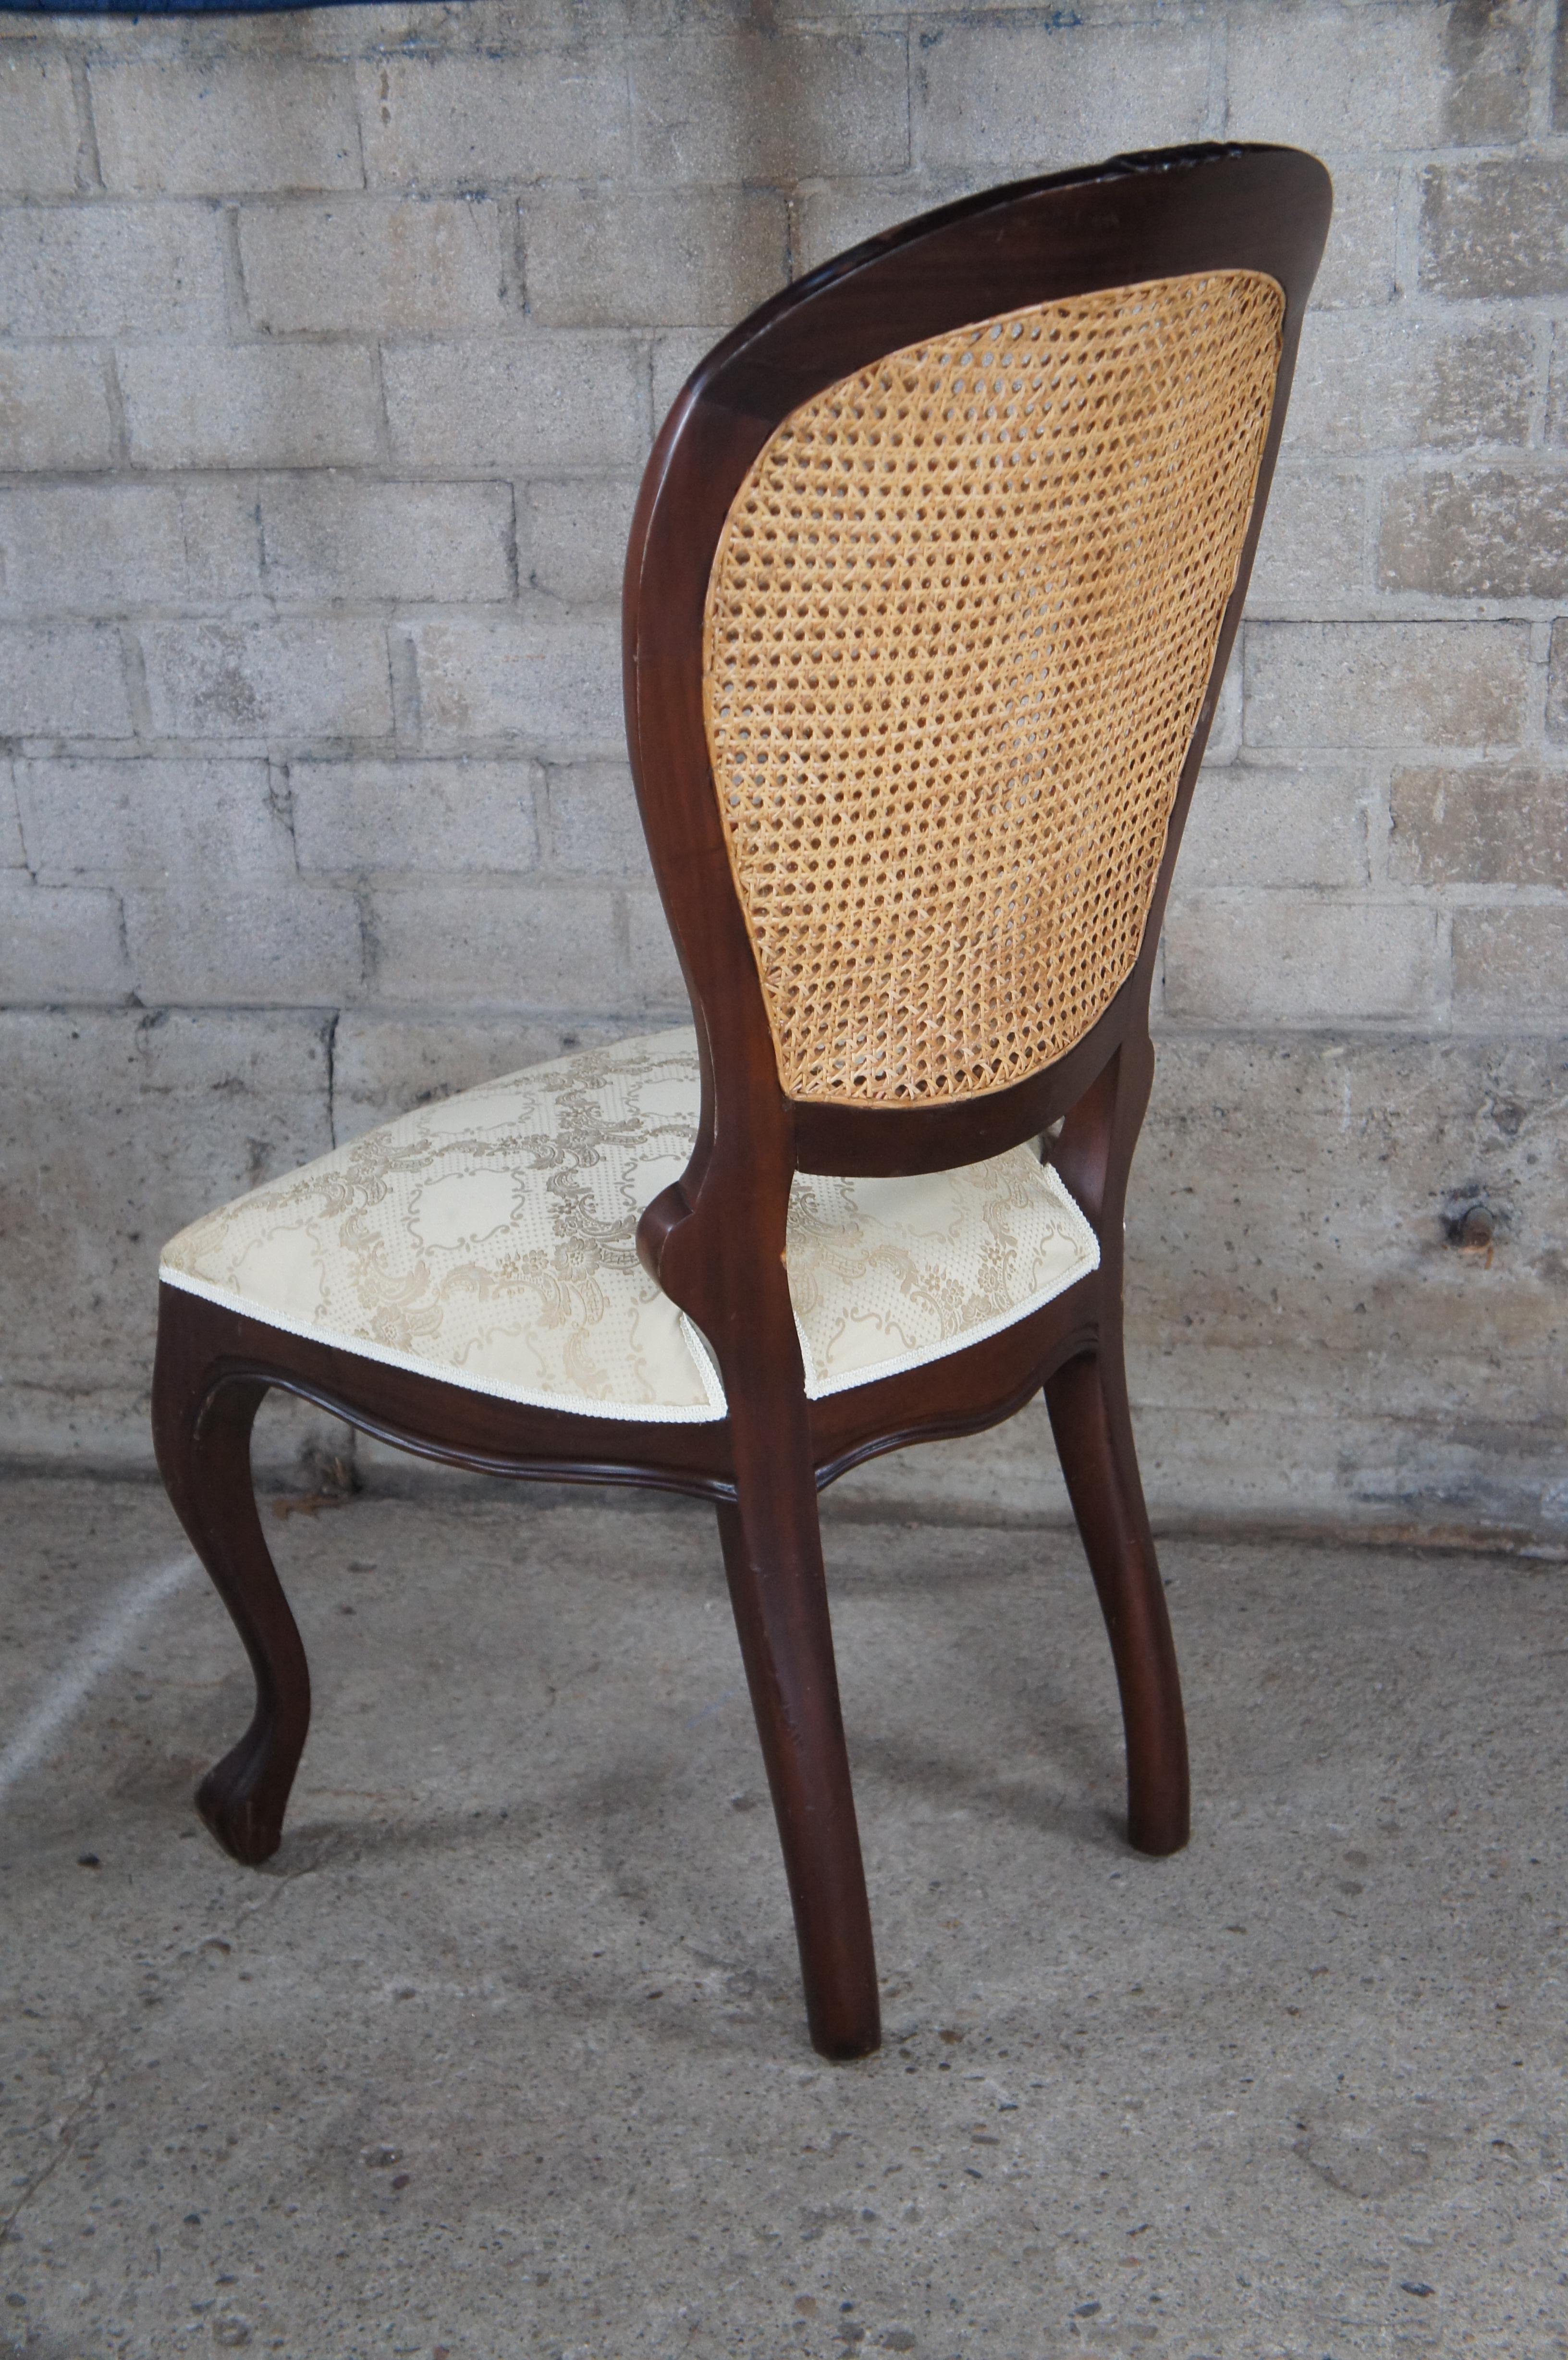 3 Victorian Revival Mahogany Balloon Back Caned Dining Chairs Silk Brocade Seats For Sale 3